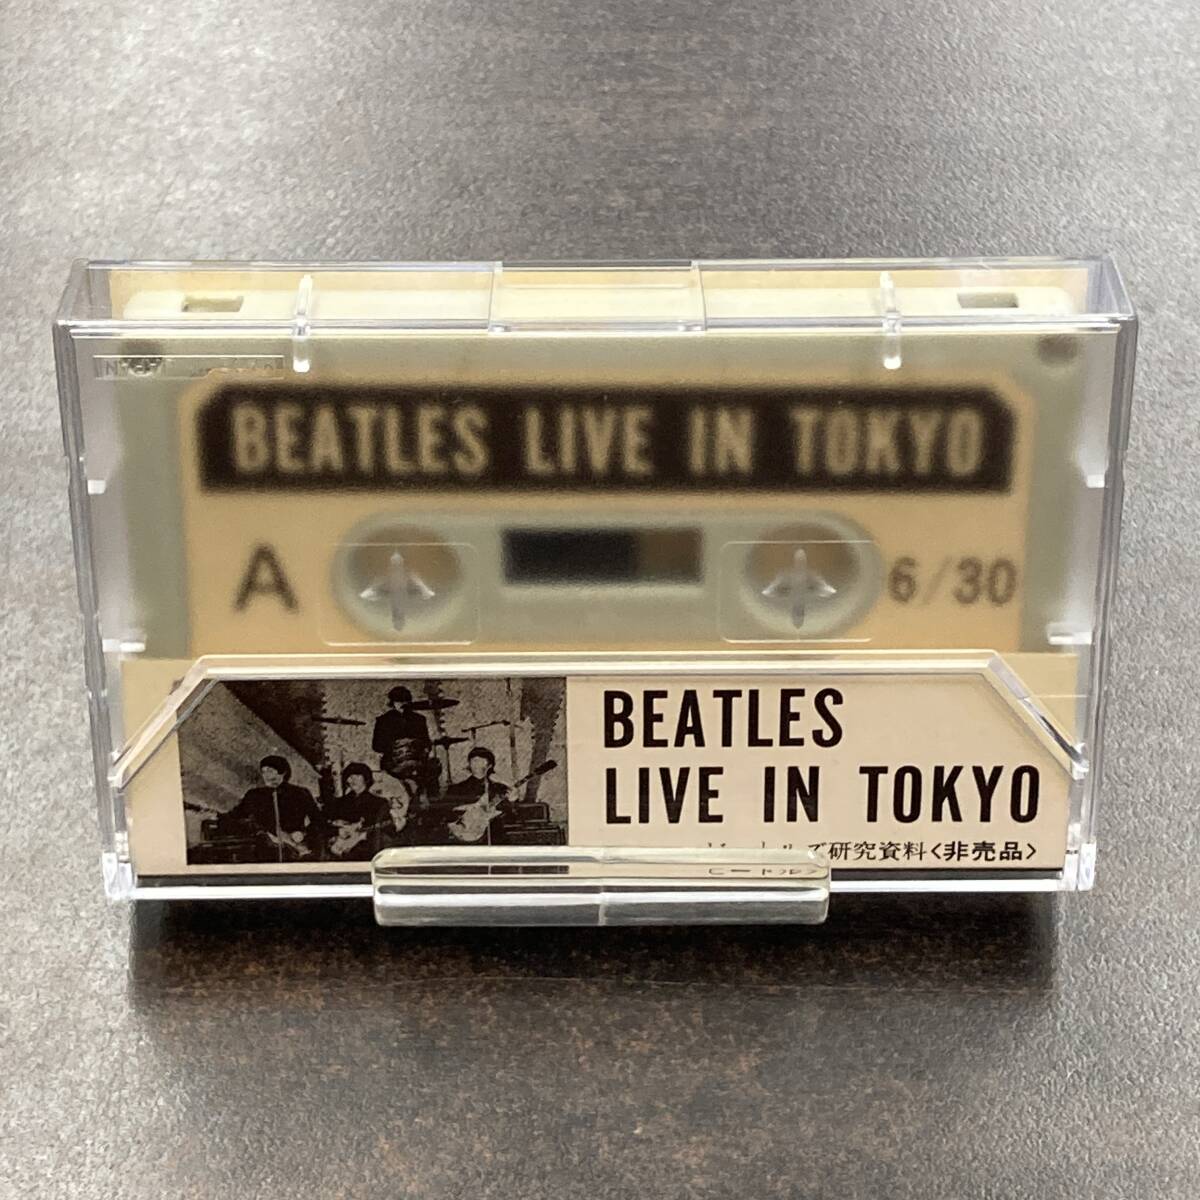 1209M ザ・ビートルズ 研究資料 BEATLES LIVE IN TOKYO カセットテープ / THE BEATLES Research materials Cassette Tapeの画像5